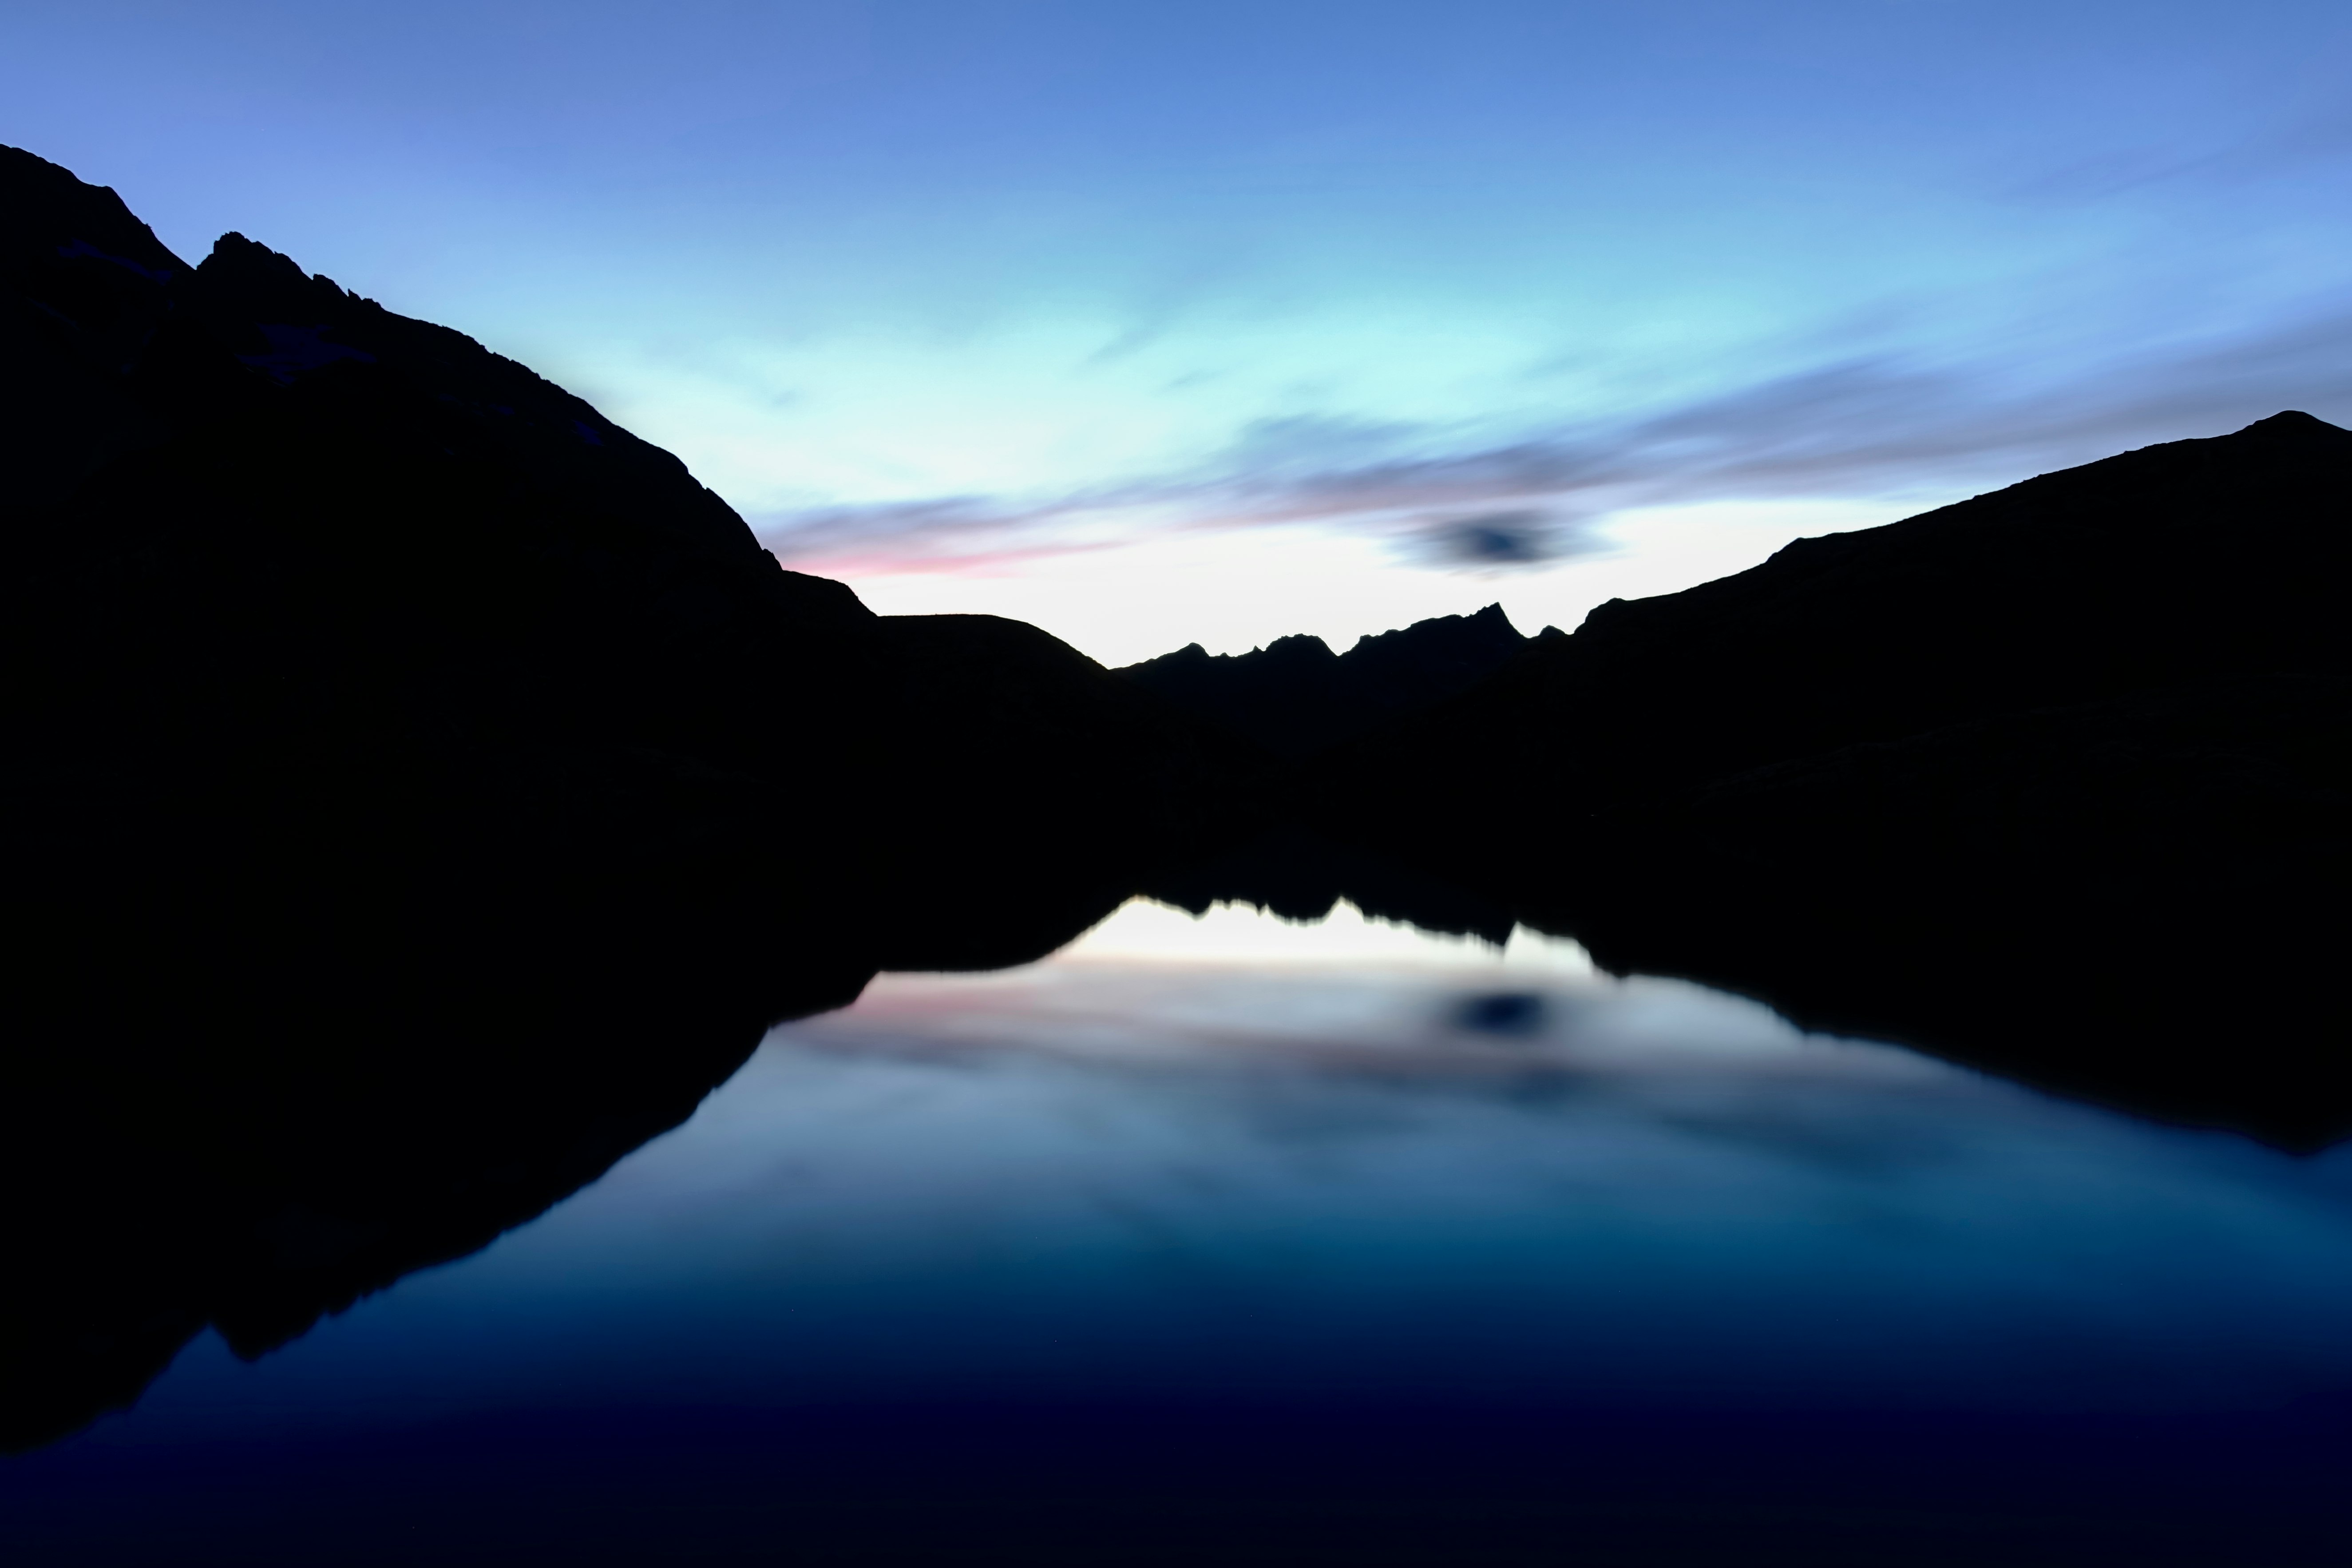 silhouette of mountain near body of water during night time